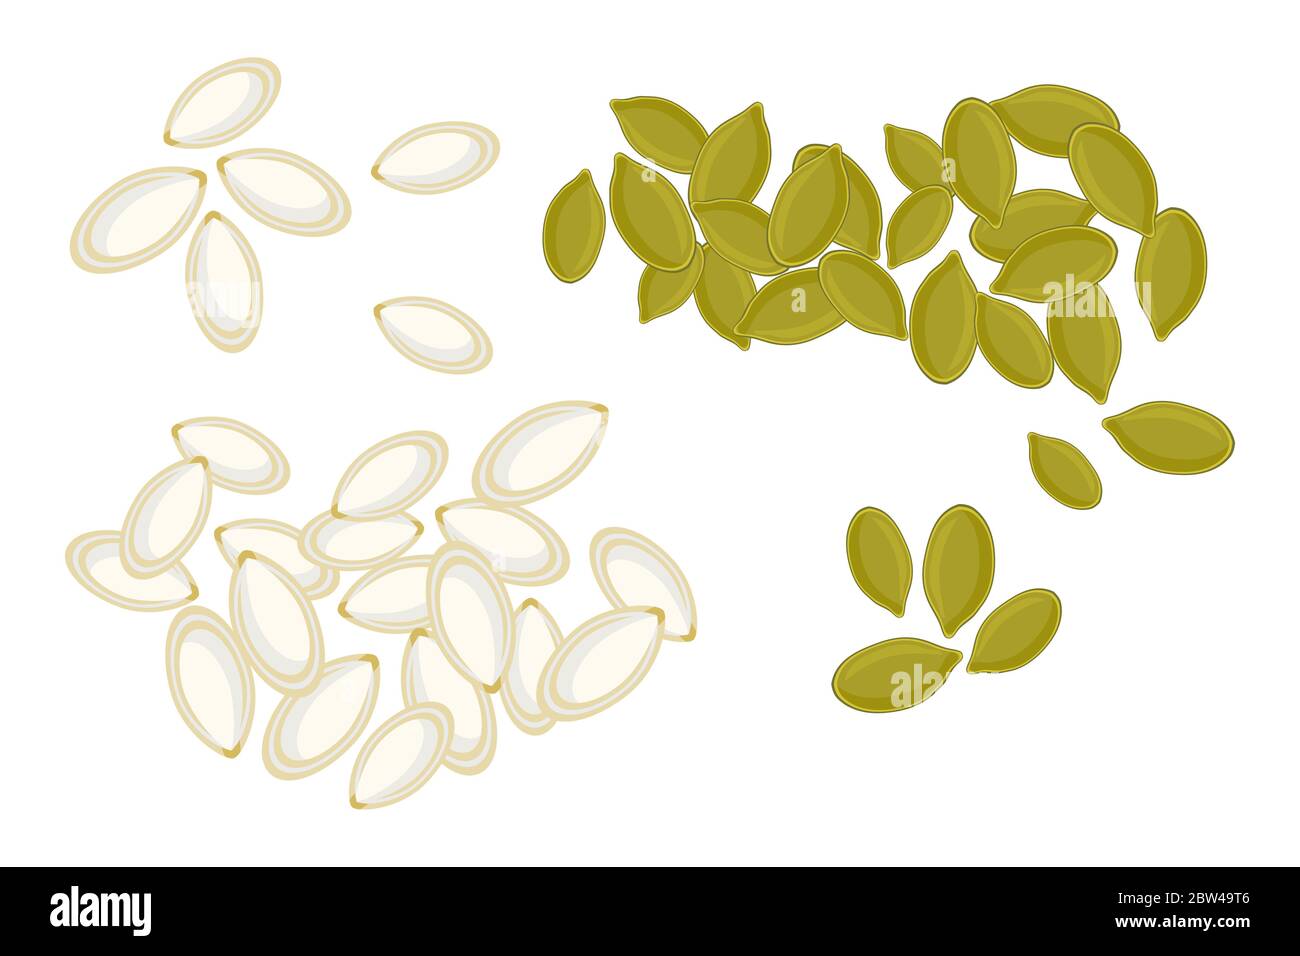 Pumpkin seeds isolated on white background. Whole and peeled pumpkin seeds. Roasted pumpkin seeds in cartoon style, top view.Stock vector illustration Stock Vector